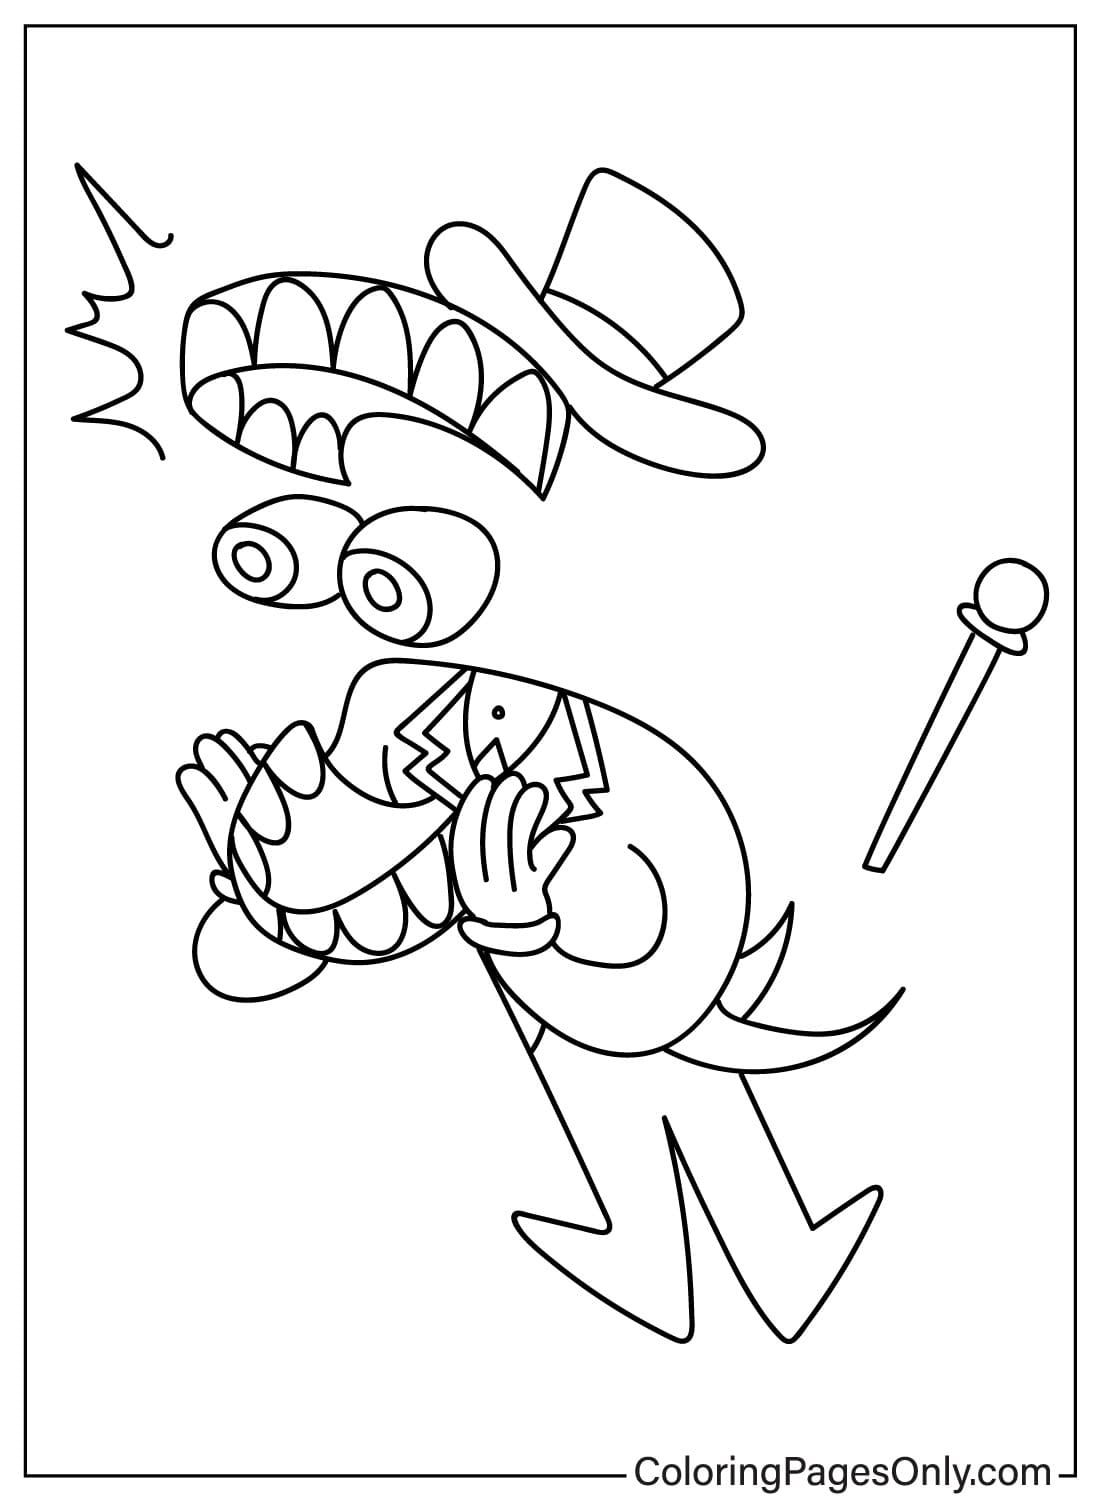 Caine Coloring Page Free Printable from Caine